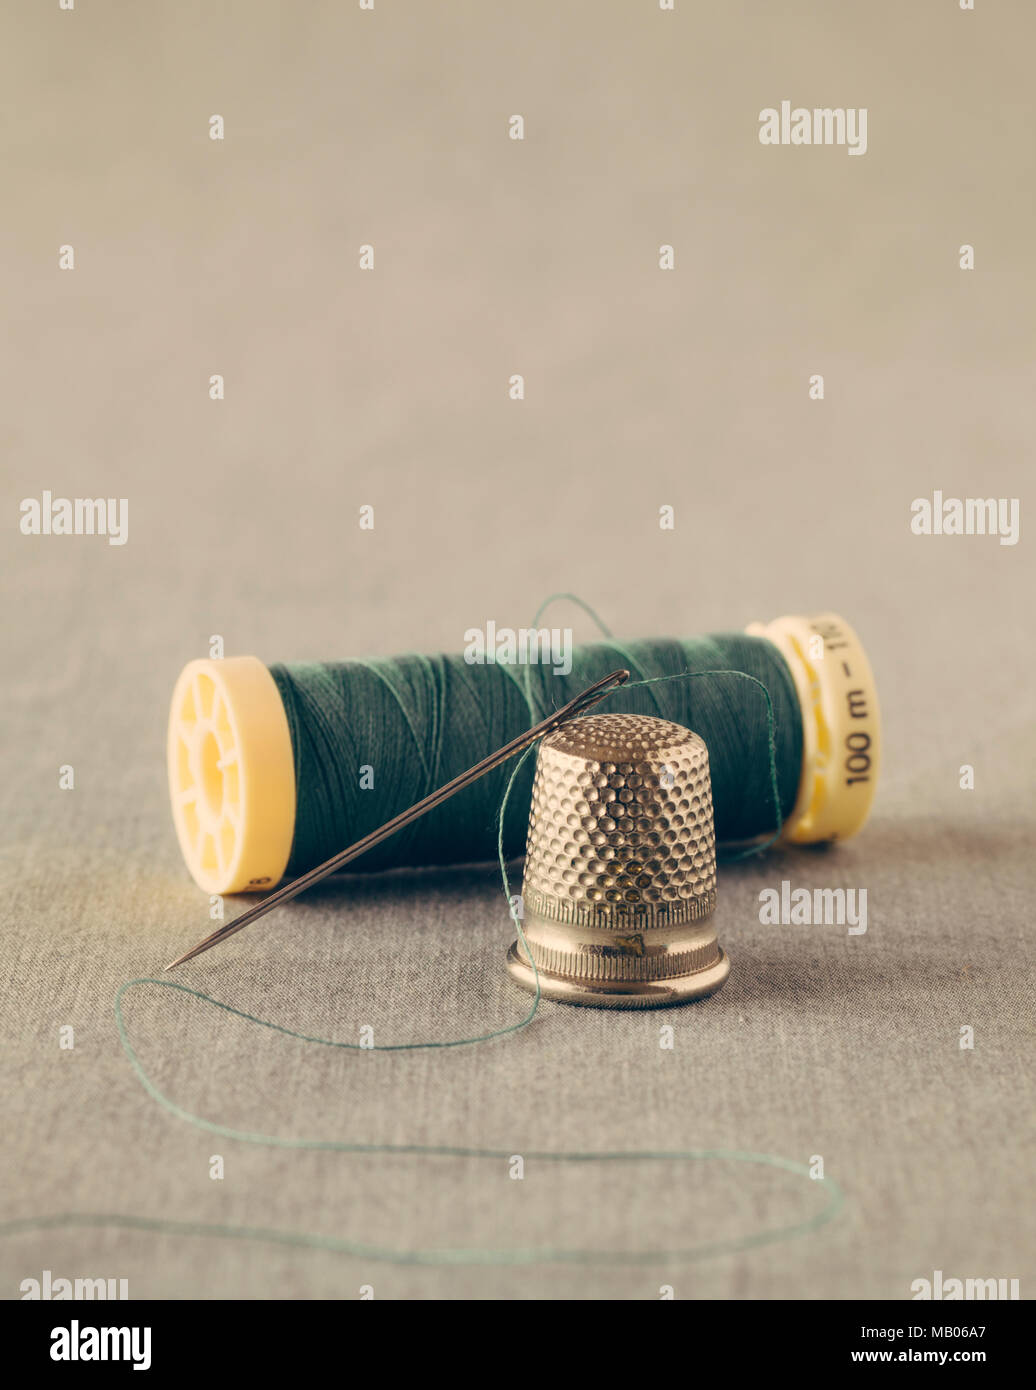 Green thread with needle and thimble close up Stock Photo